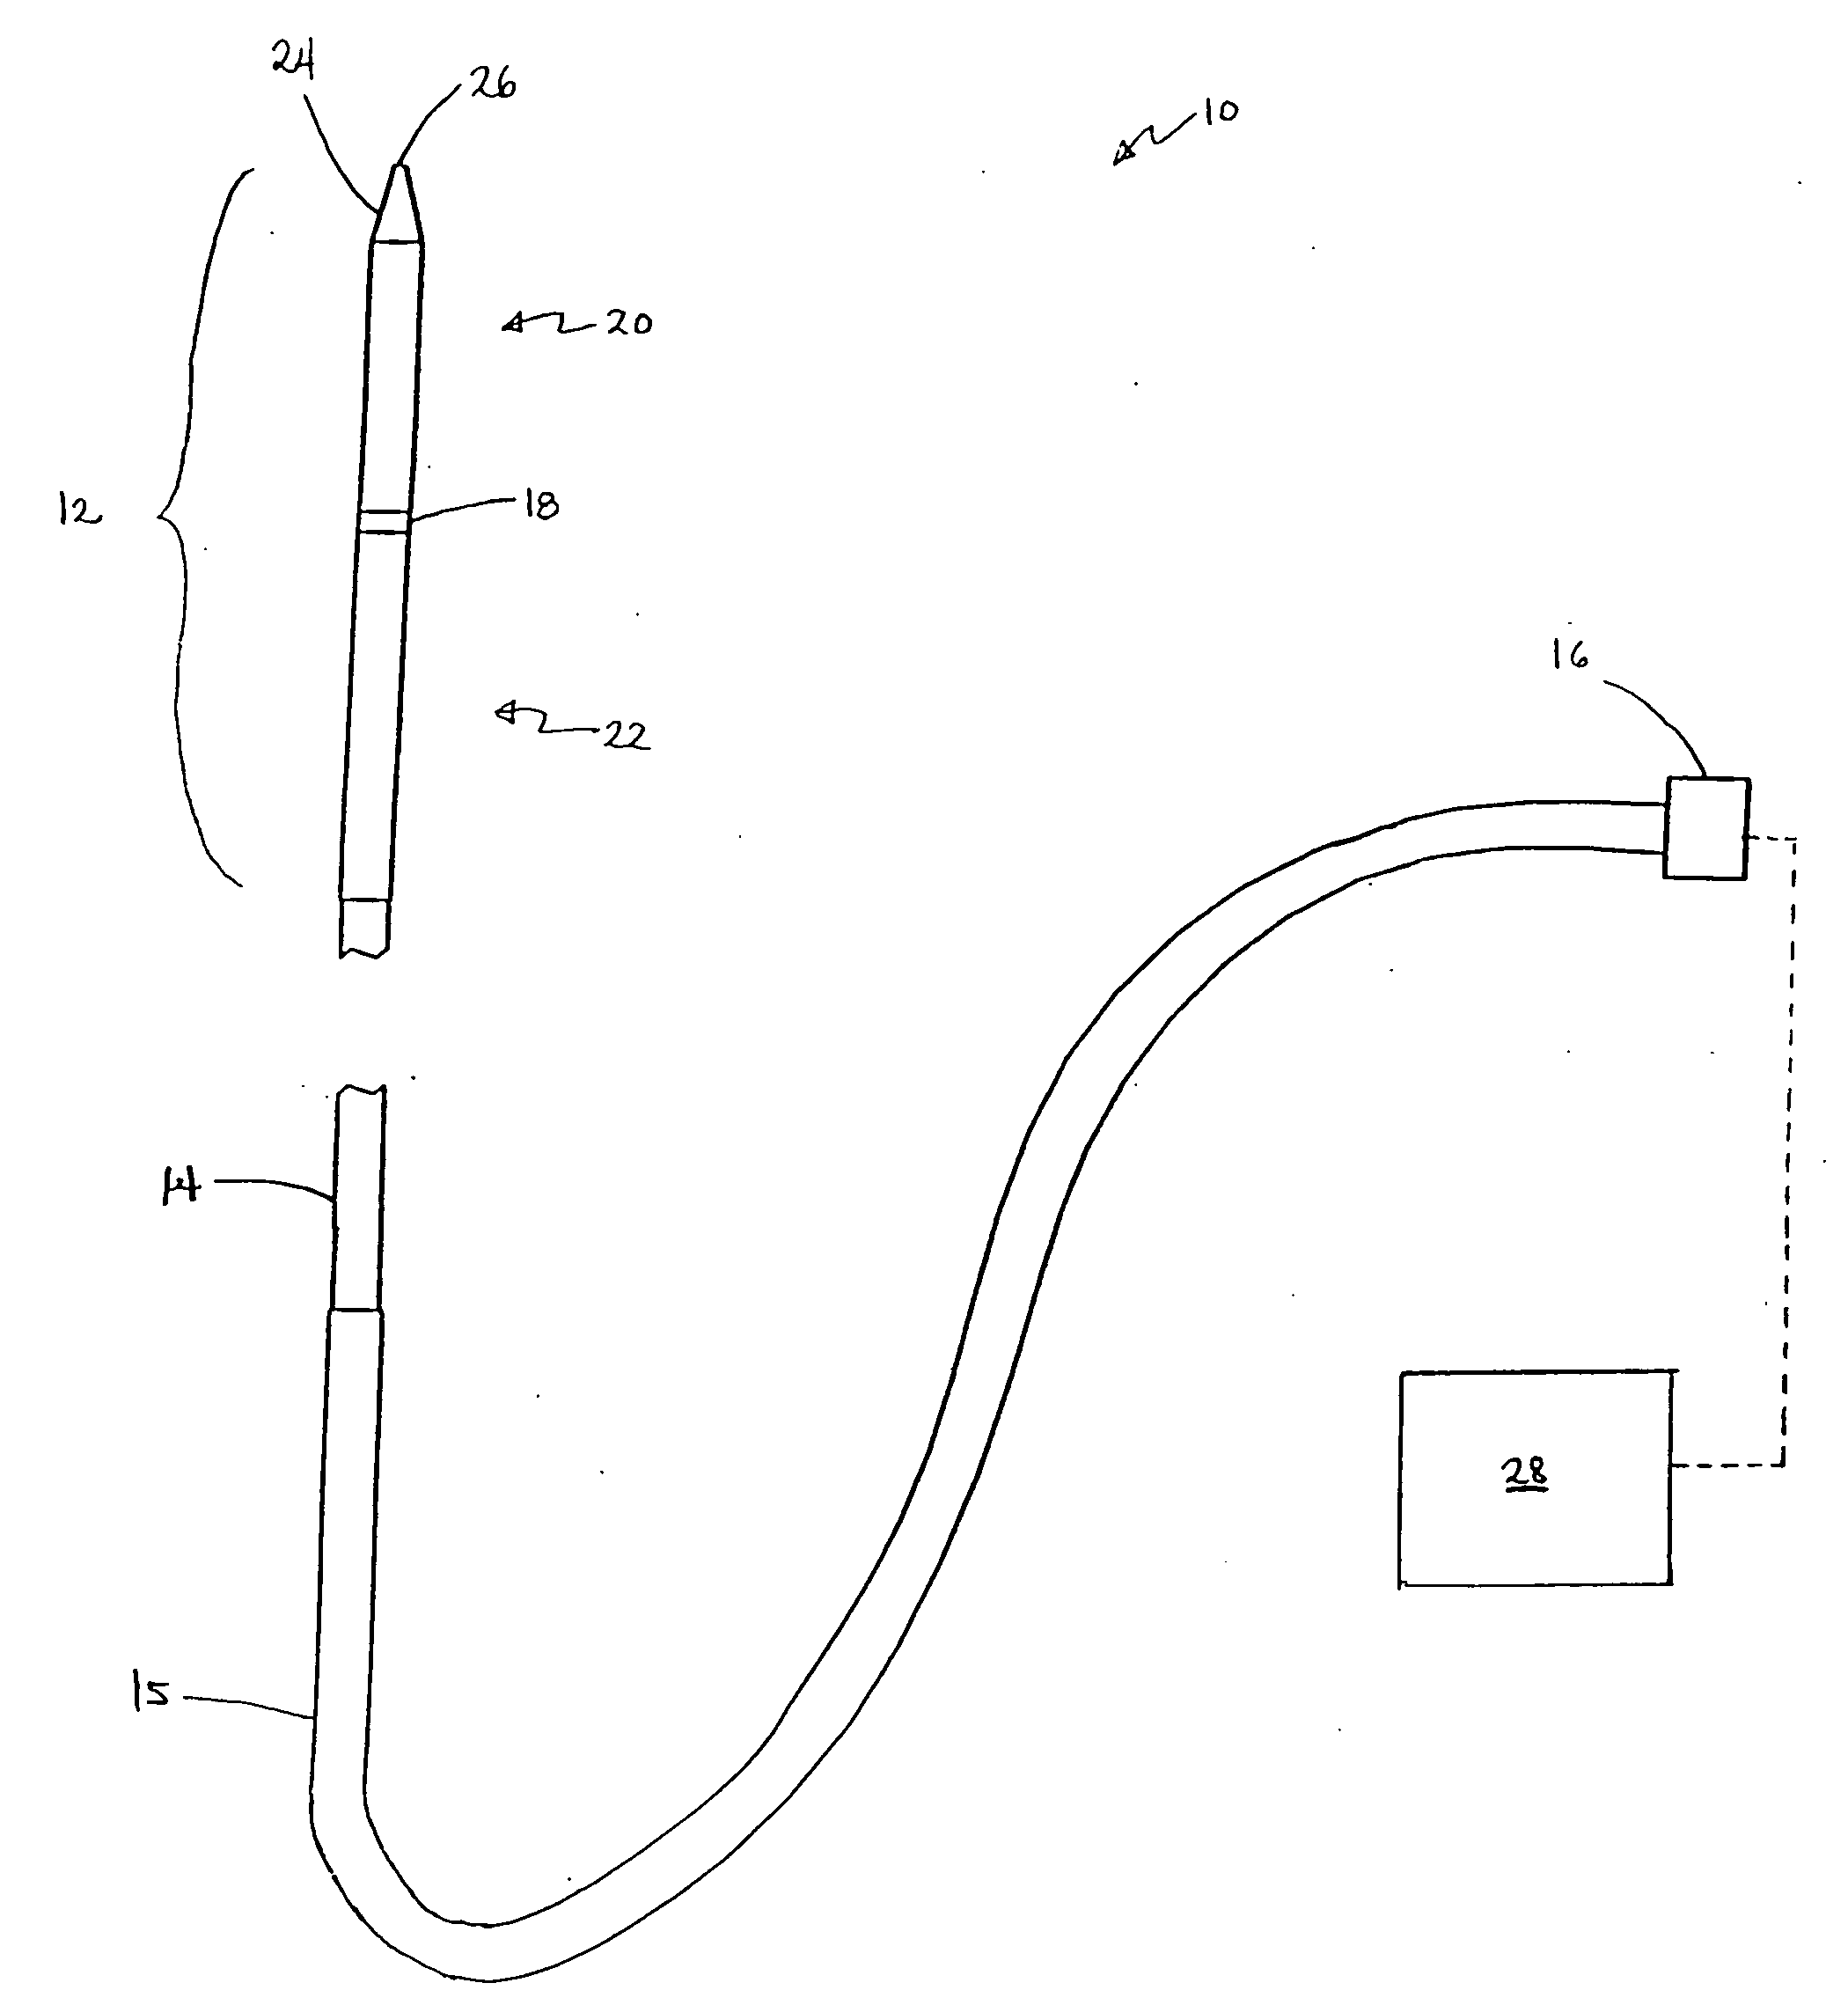 High-strength microwave antenna assemblies and methods of use